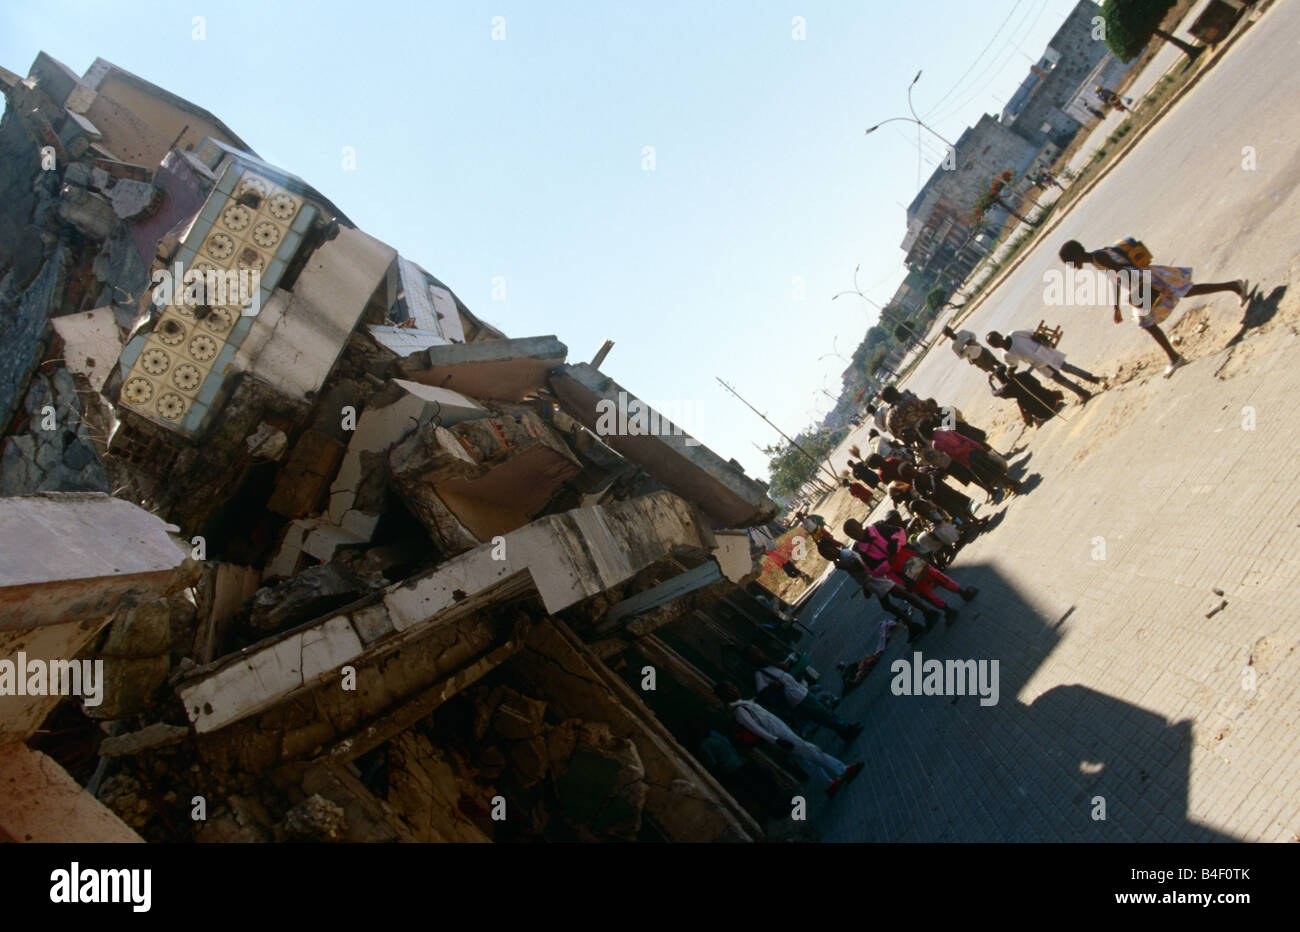 Street children sheltering by tumbling building in war-torn Angola Stock Photo